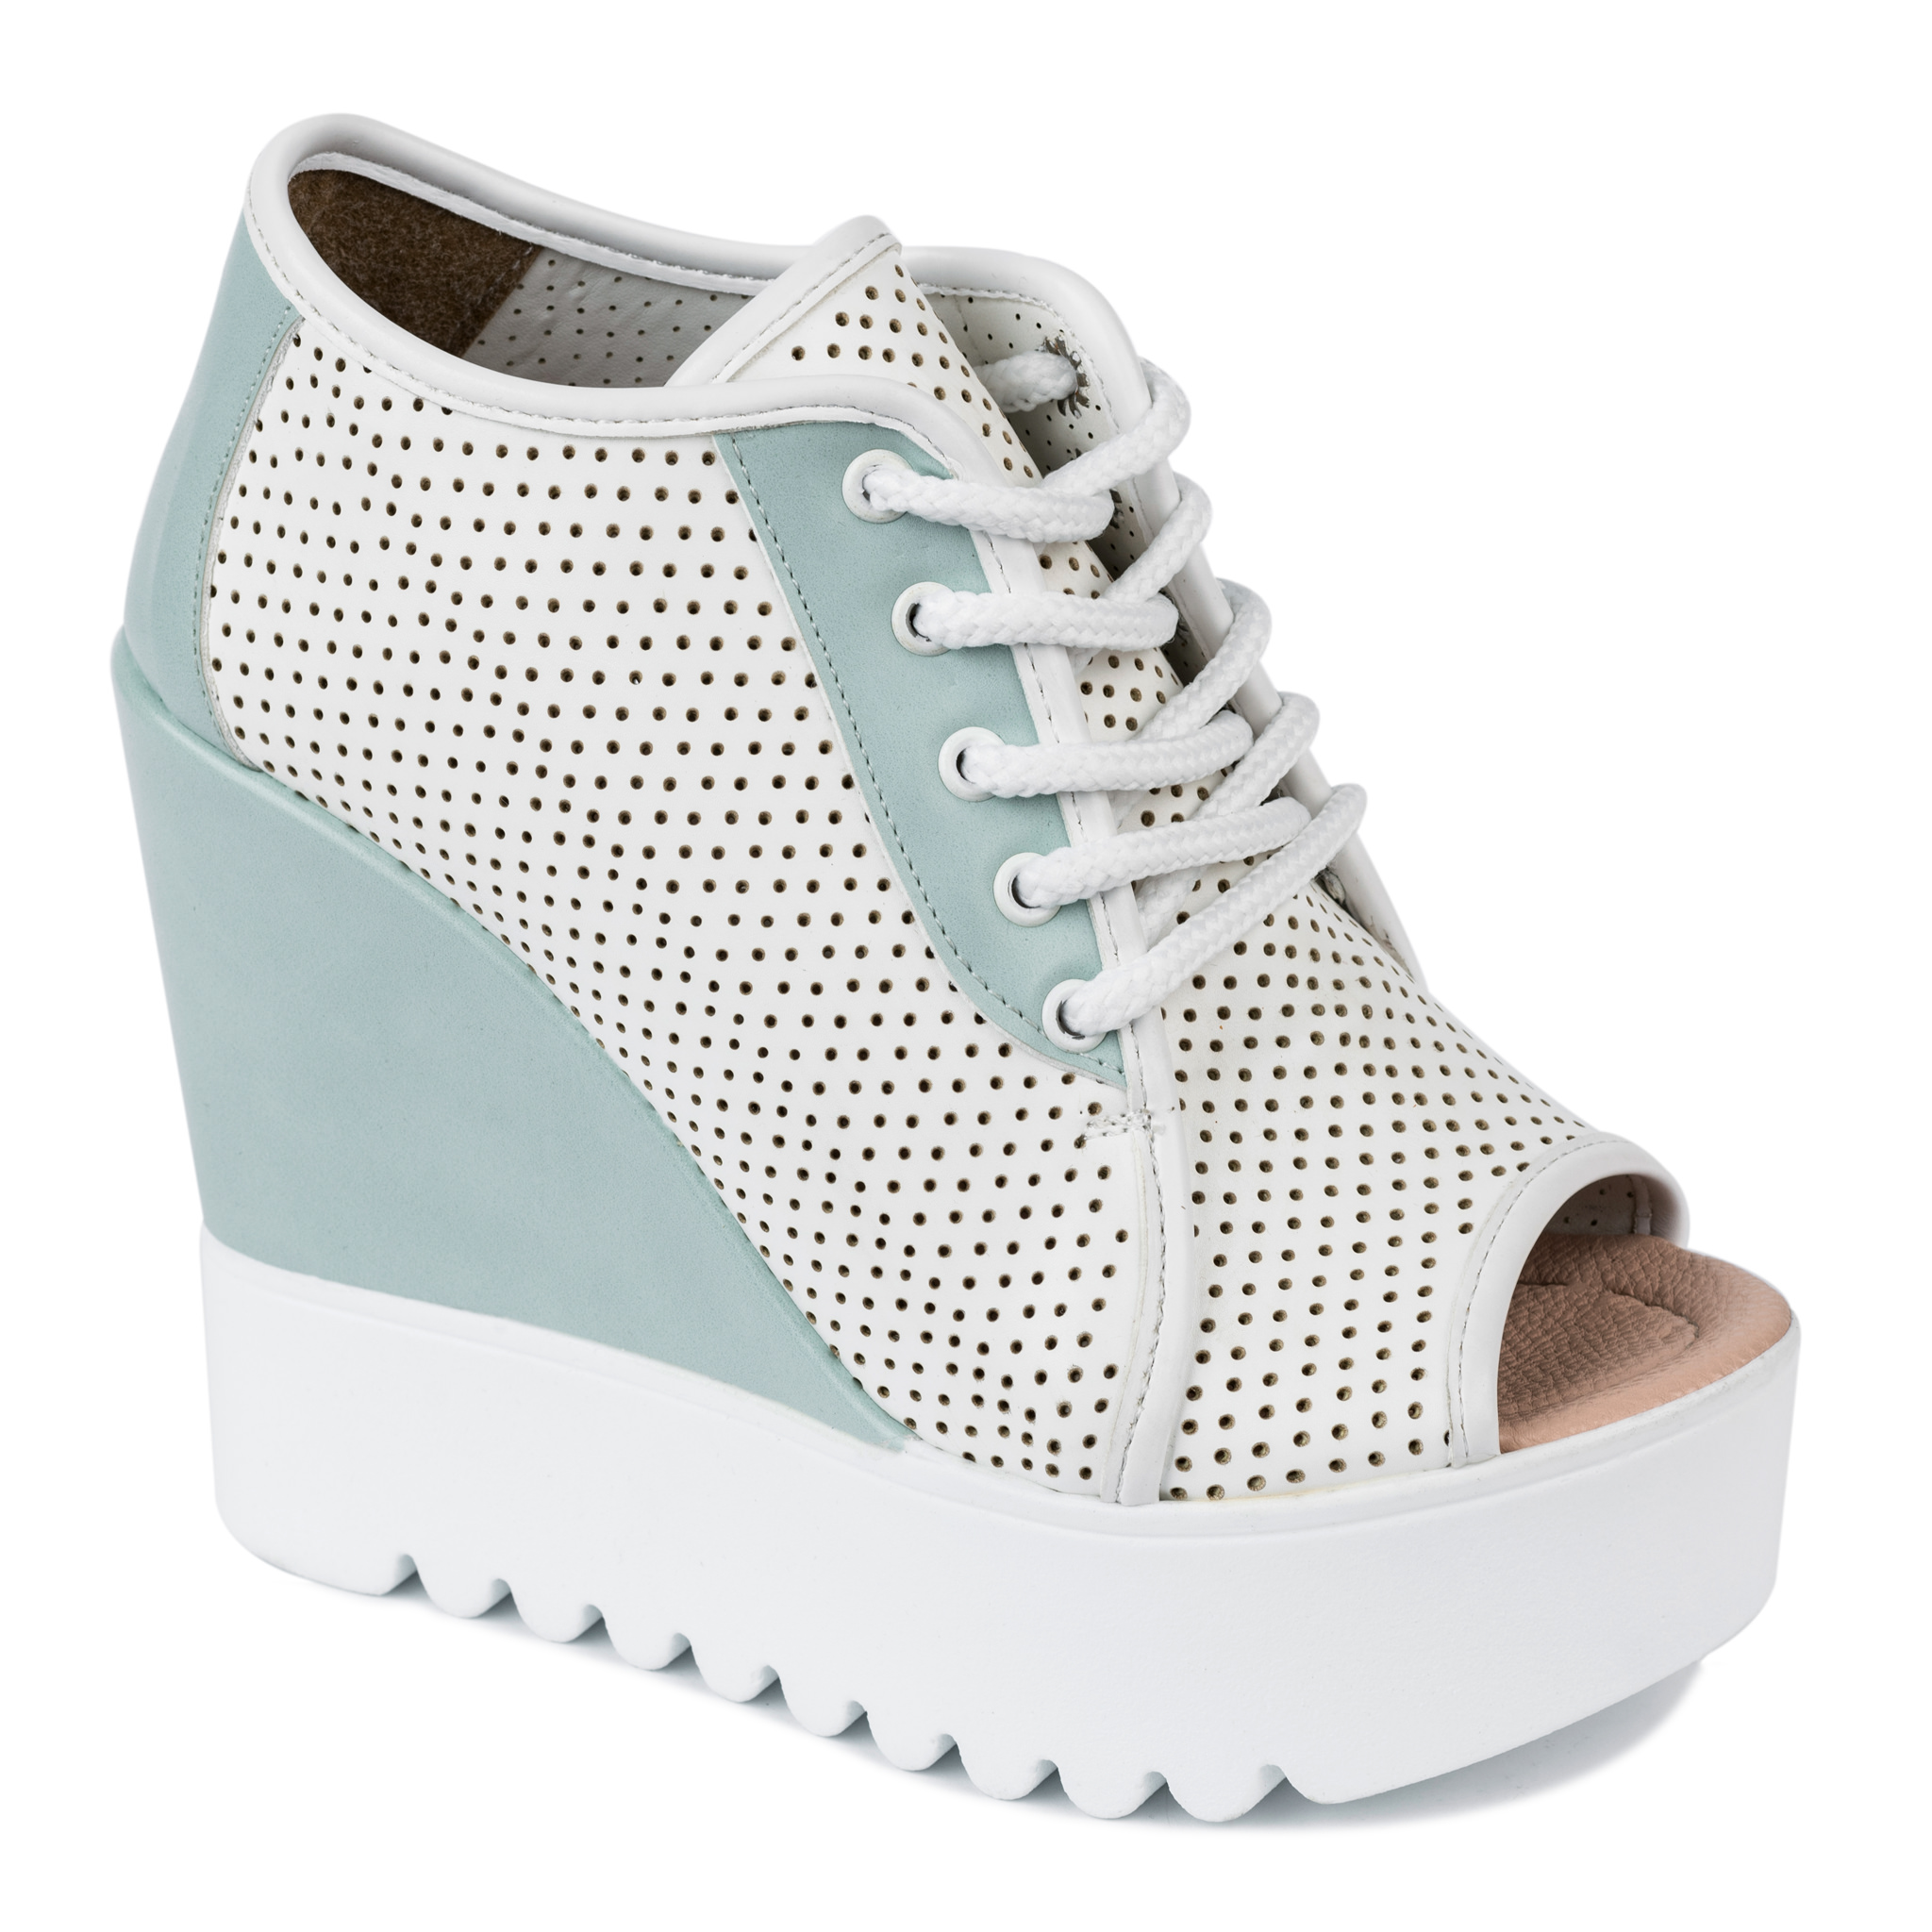 HOLLOW WEDGE SHOES - WHITE/MINT